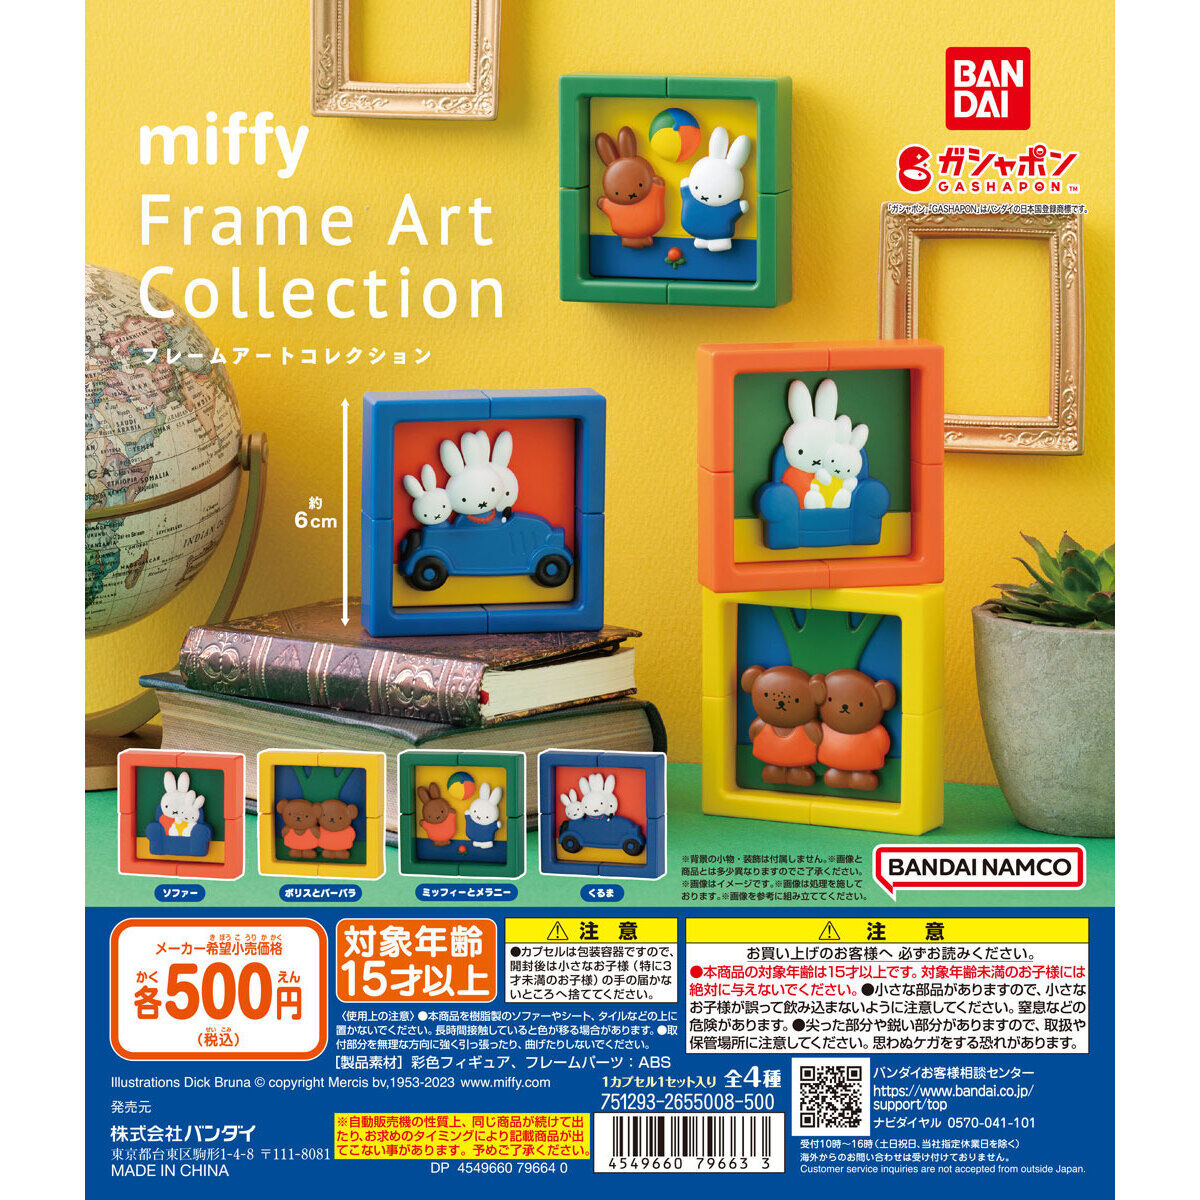 miffy Frame Art Collection